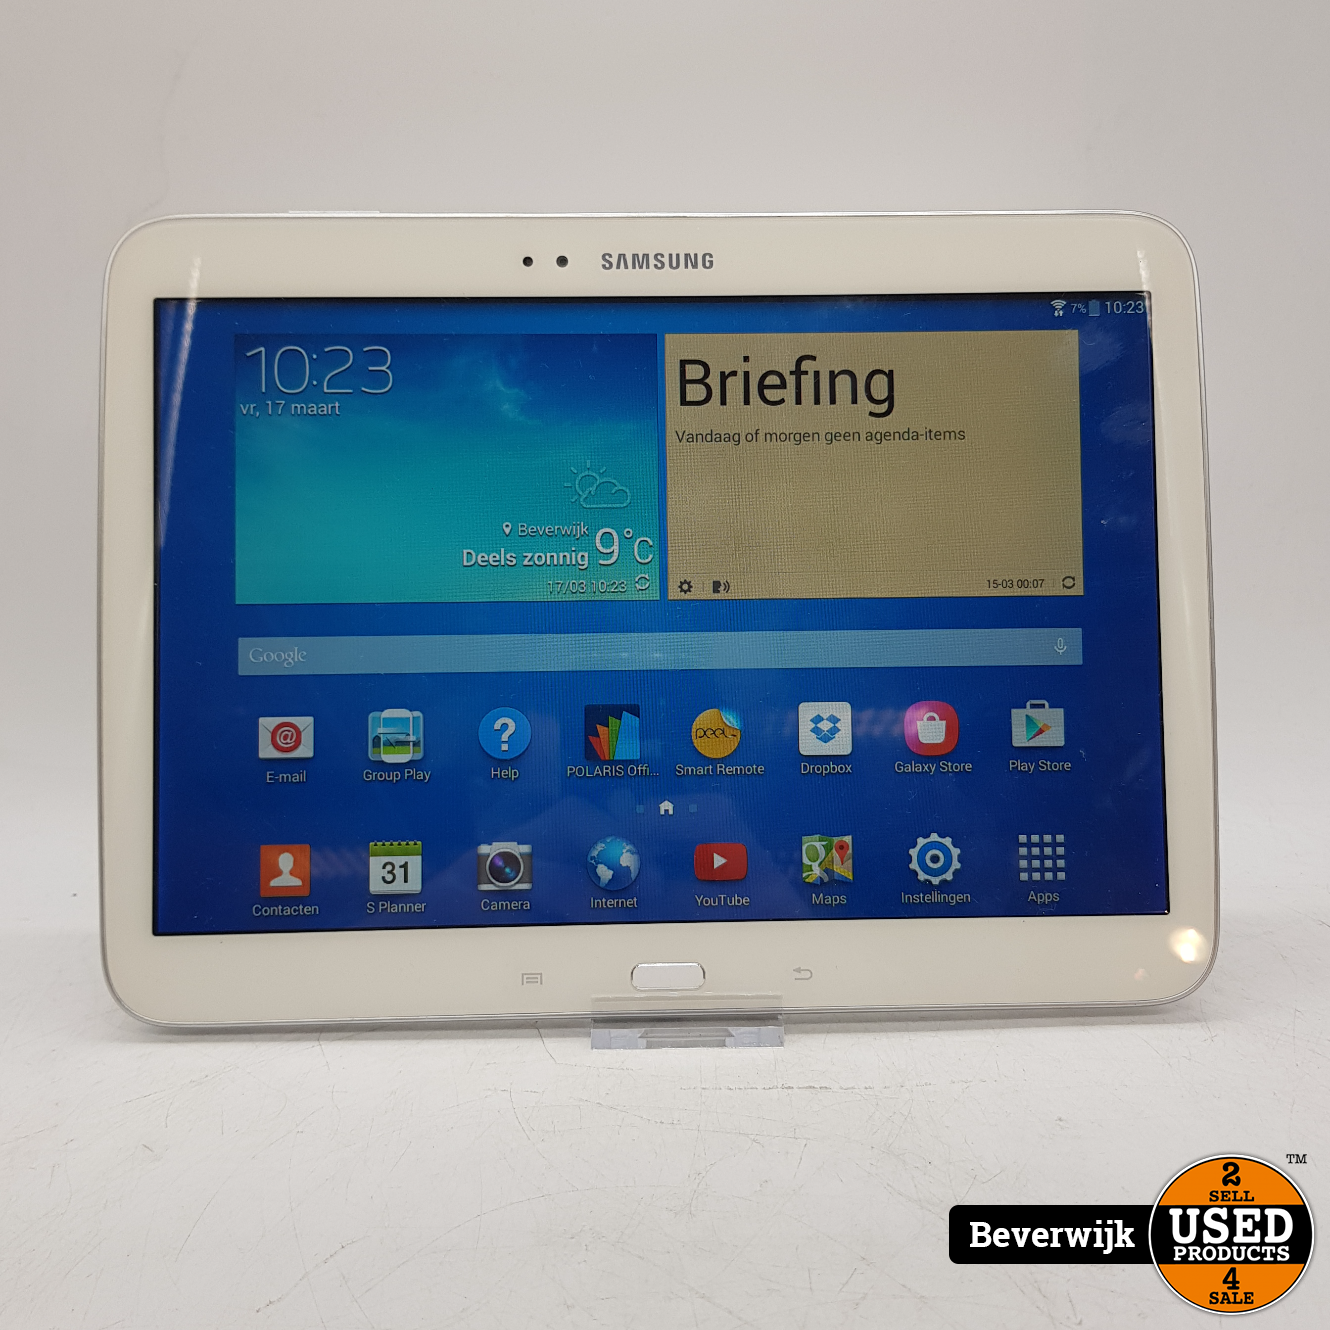 onhandig Omringd Demon Play 18-03 Samsung Galaxy Tab 3 16GB Android 4 10 inch in Goede staat - Used  Products Beverwijk